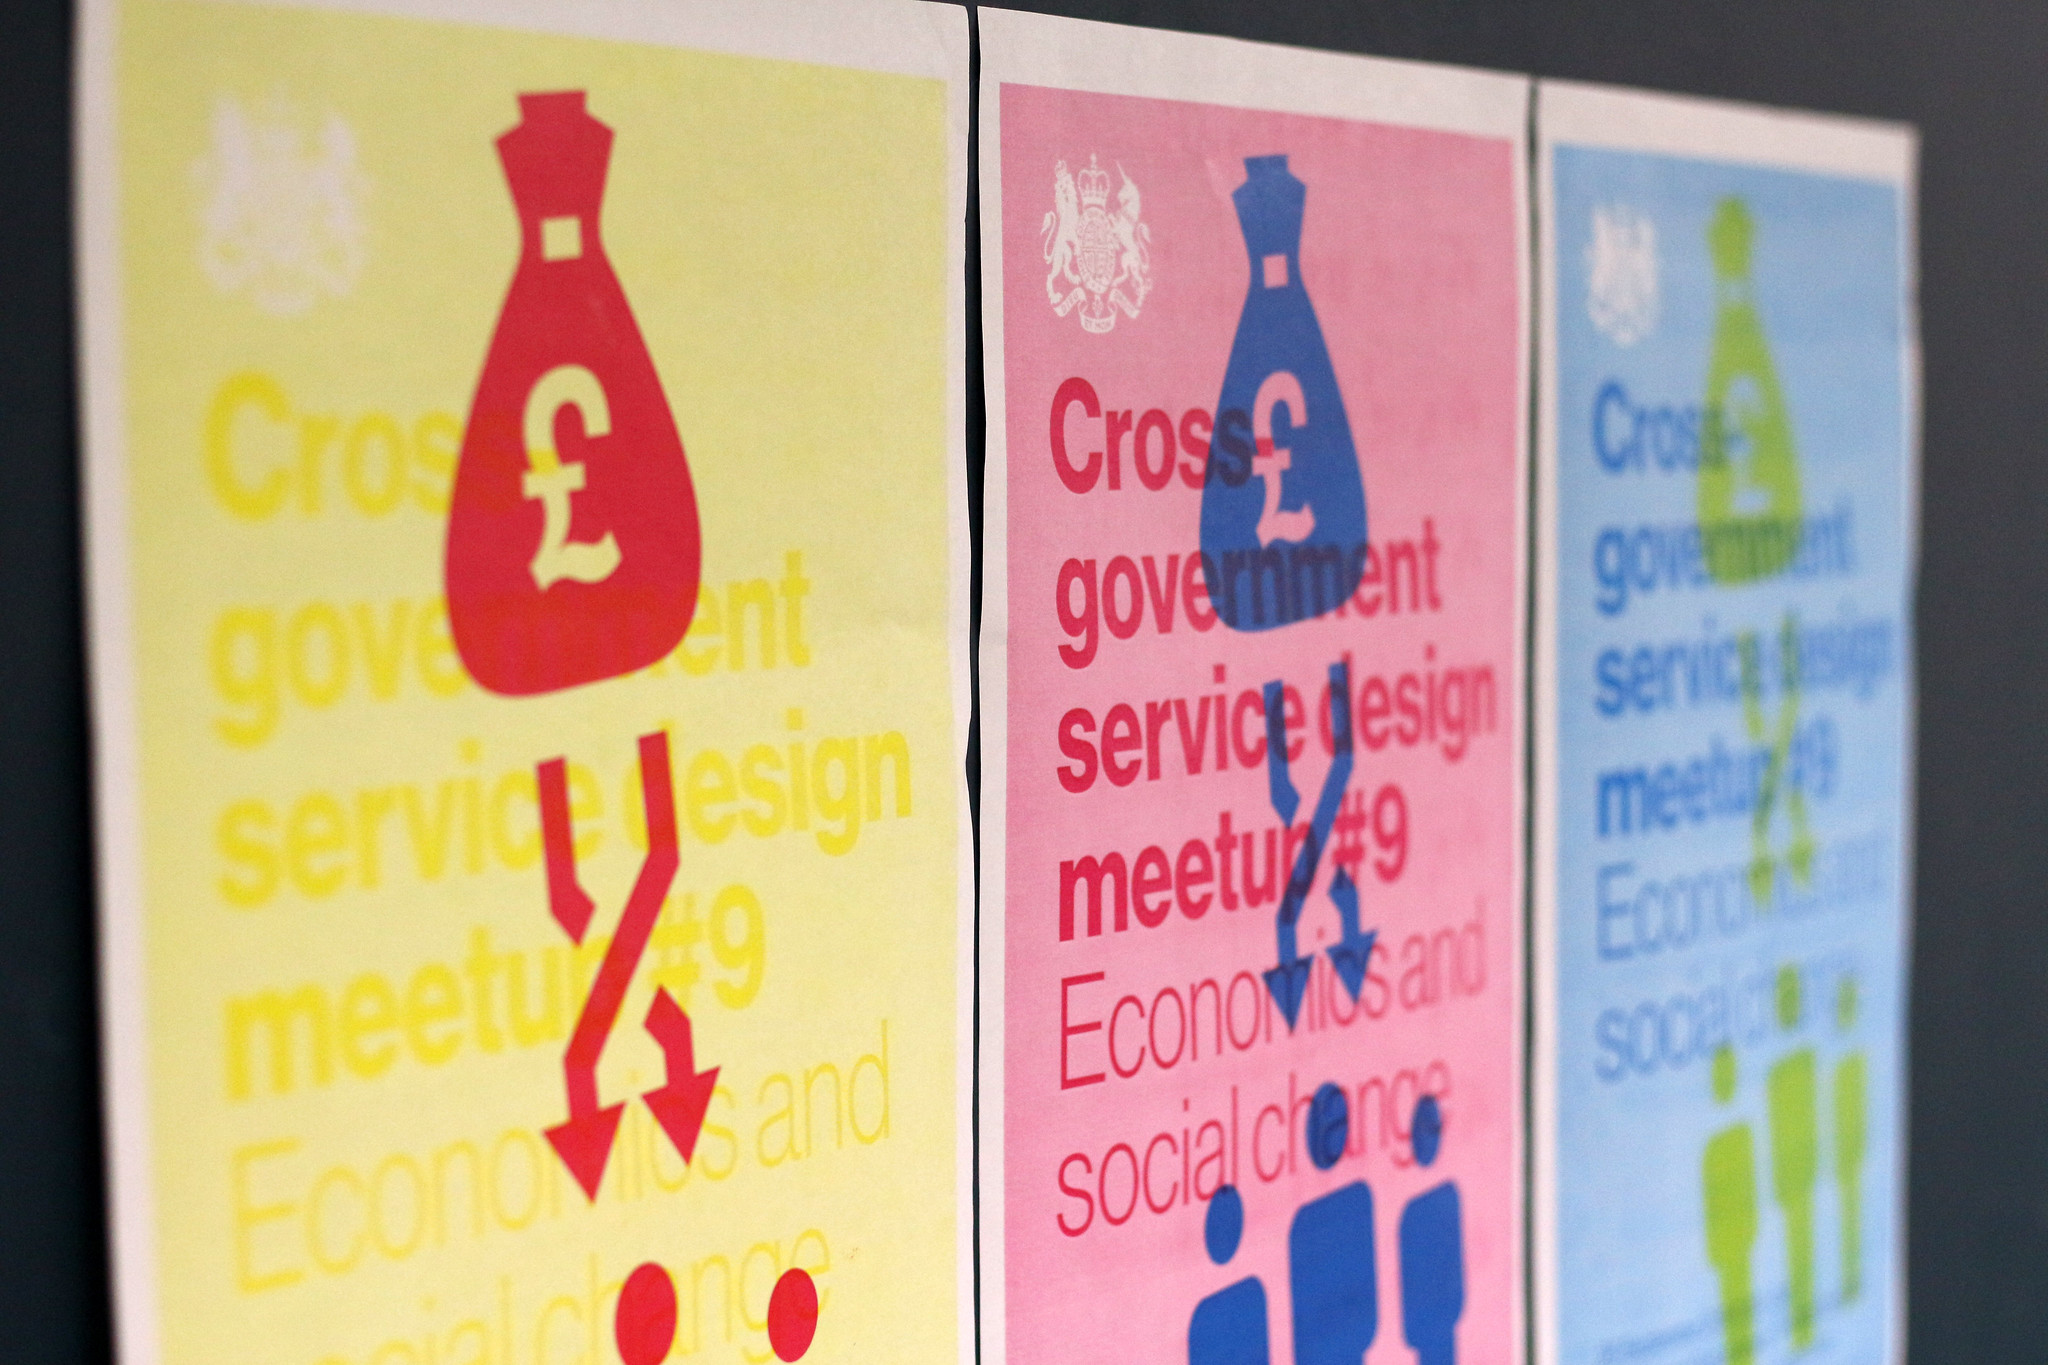 An image of 3 colourful posters for the Cross government service design community meetup, tilted "Economics and social change"